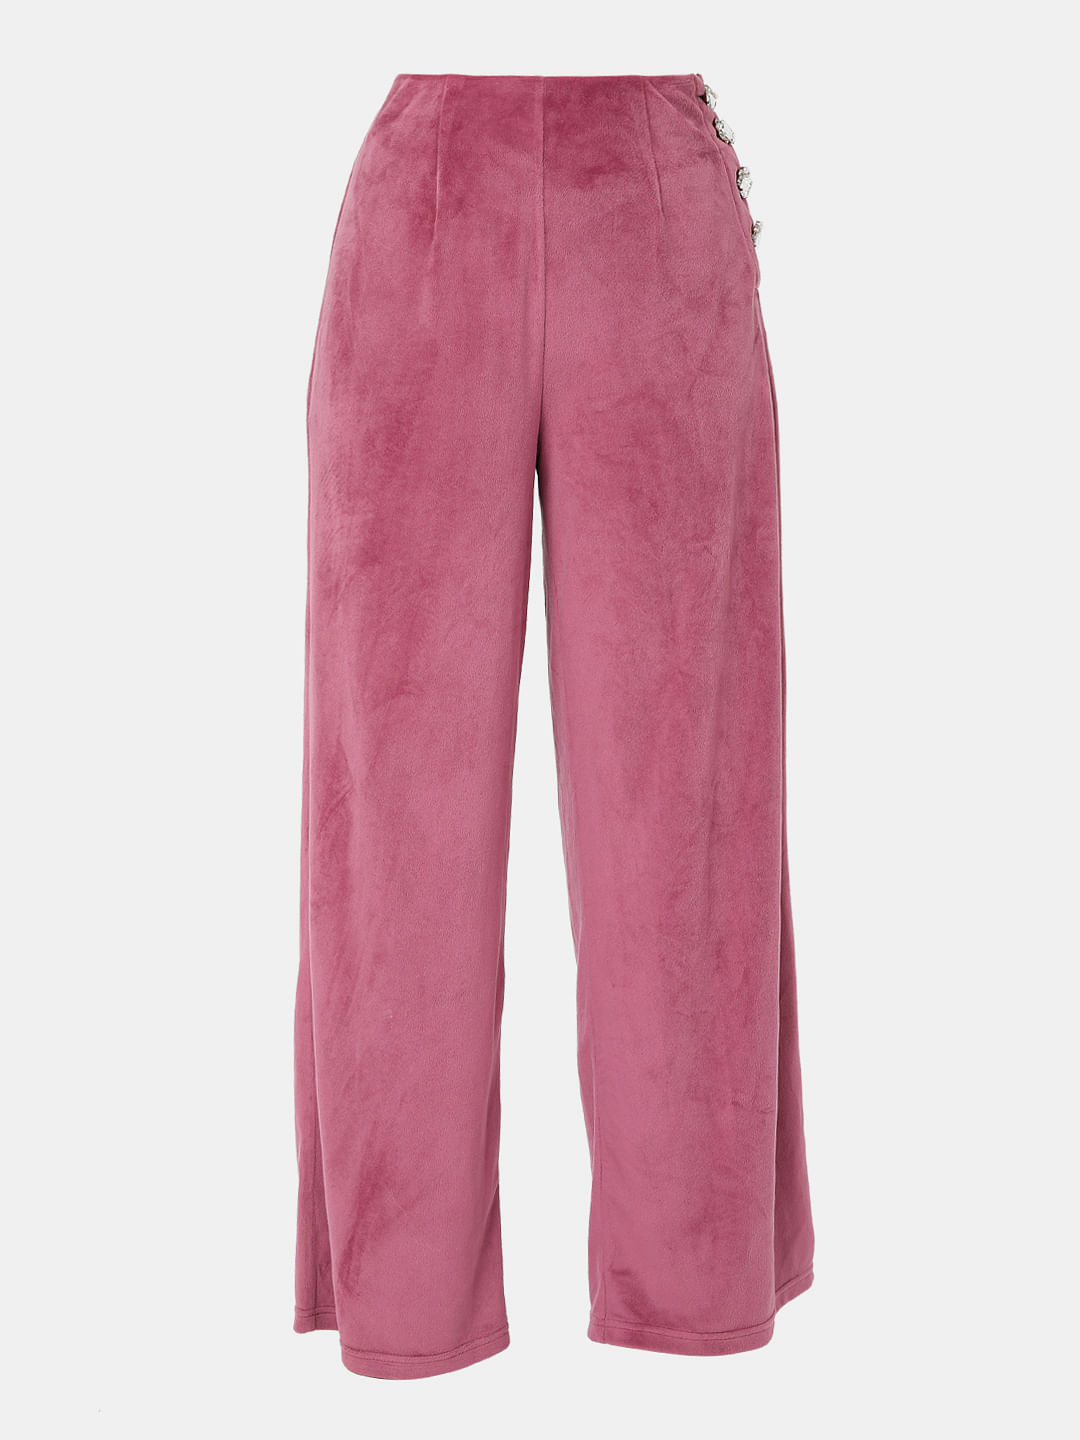 W Dark Pink Solid Salwar Pants, Size-M - (21MAF61172-920110) in Ludhiana at  best price by Simran SILK Store - Justdial